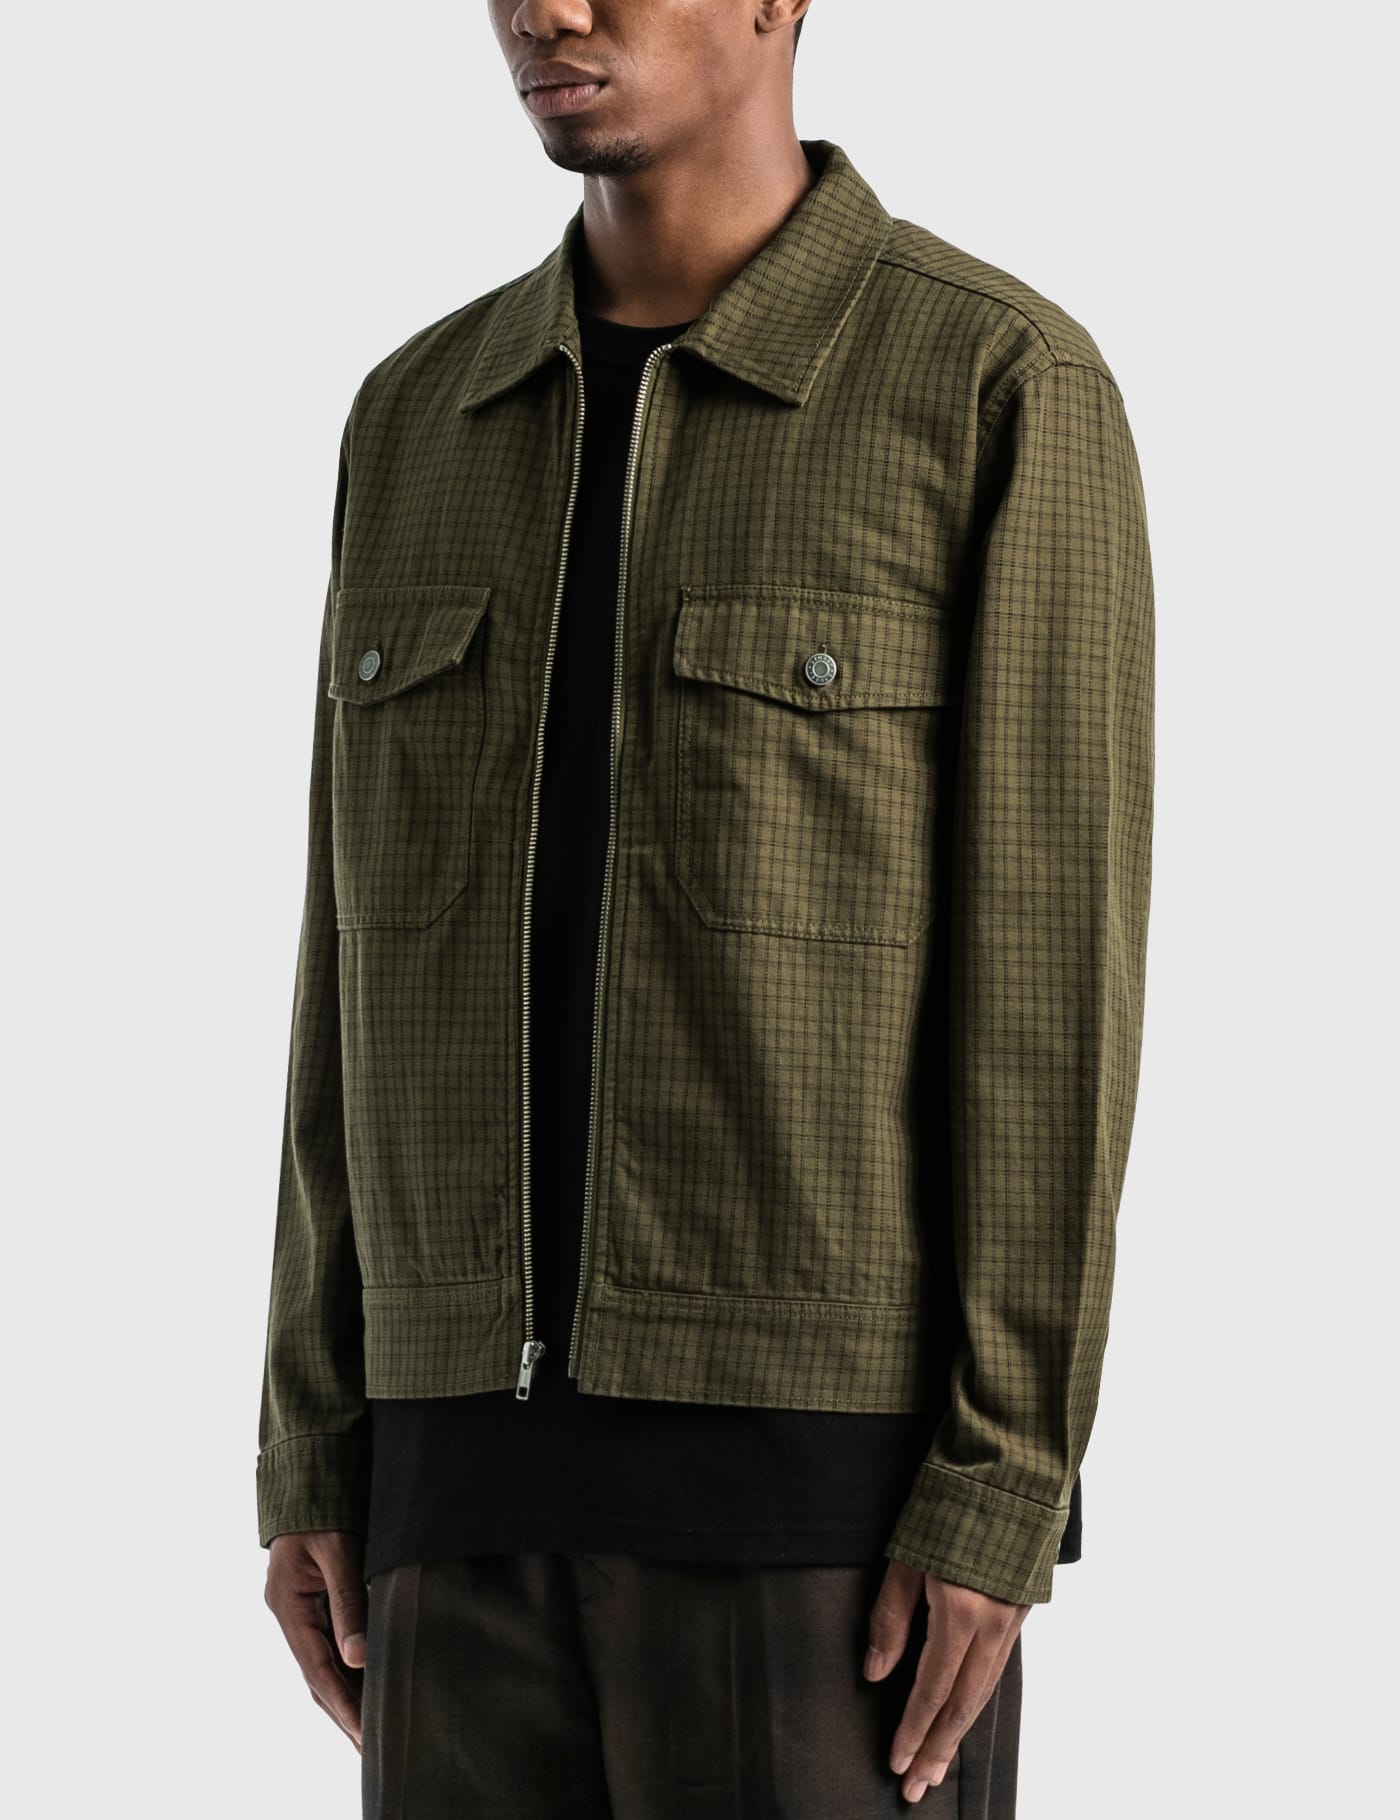 Stussy - Check Garage Jacket | HBX - Globally Curated Fashion and Lifestyle  by Hypebeast